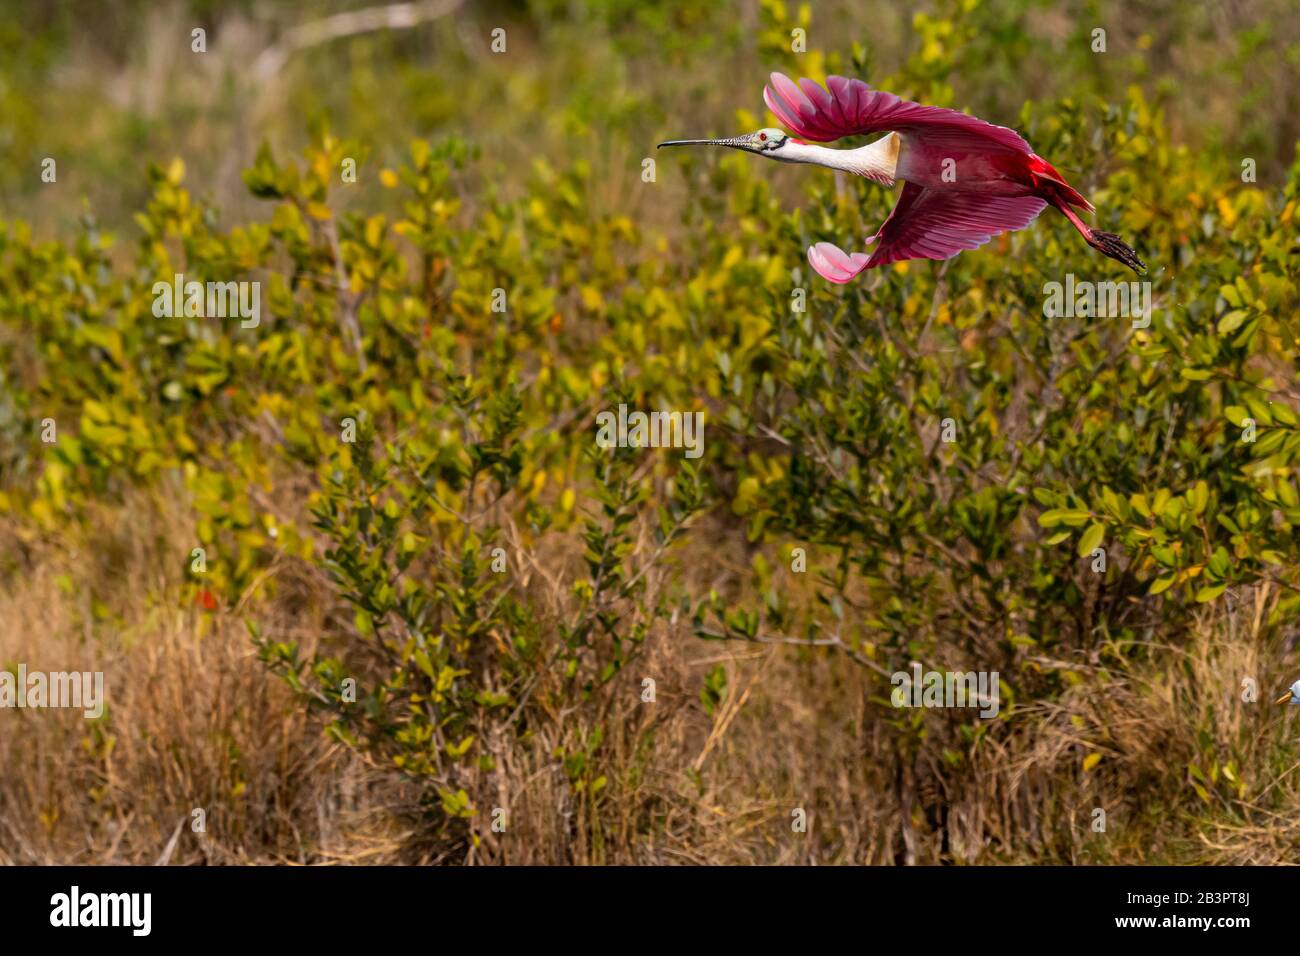 A Roseate Spoonbill (Platalea ajaja) in flight against a green foliage background in Florida, USA. Stock Photo